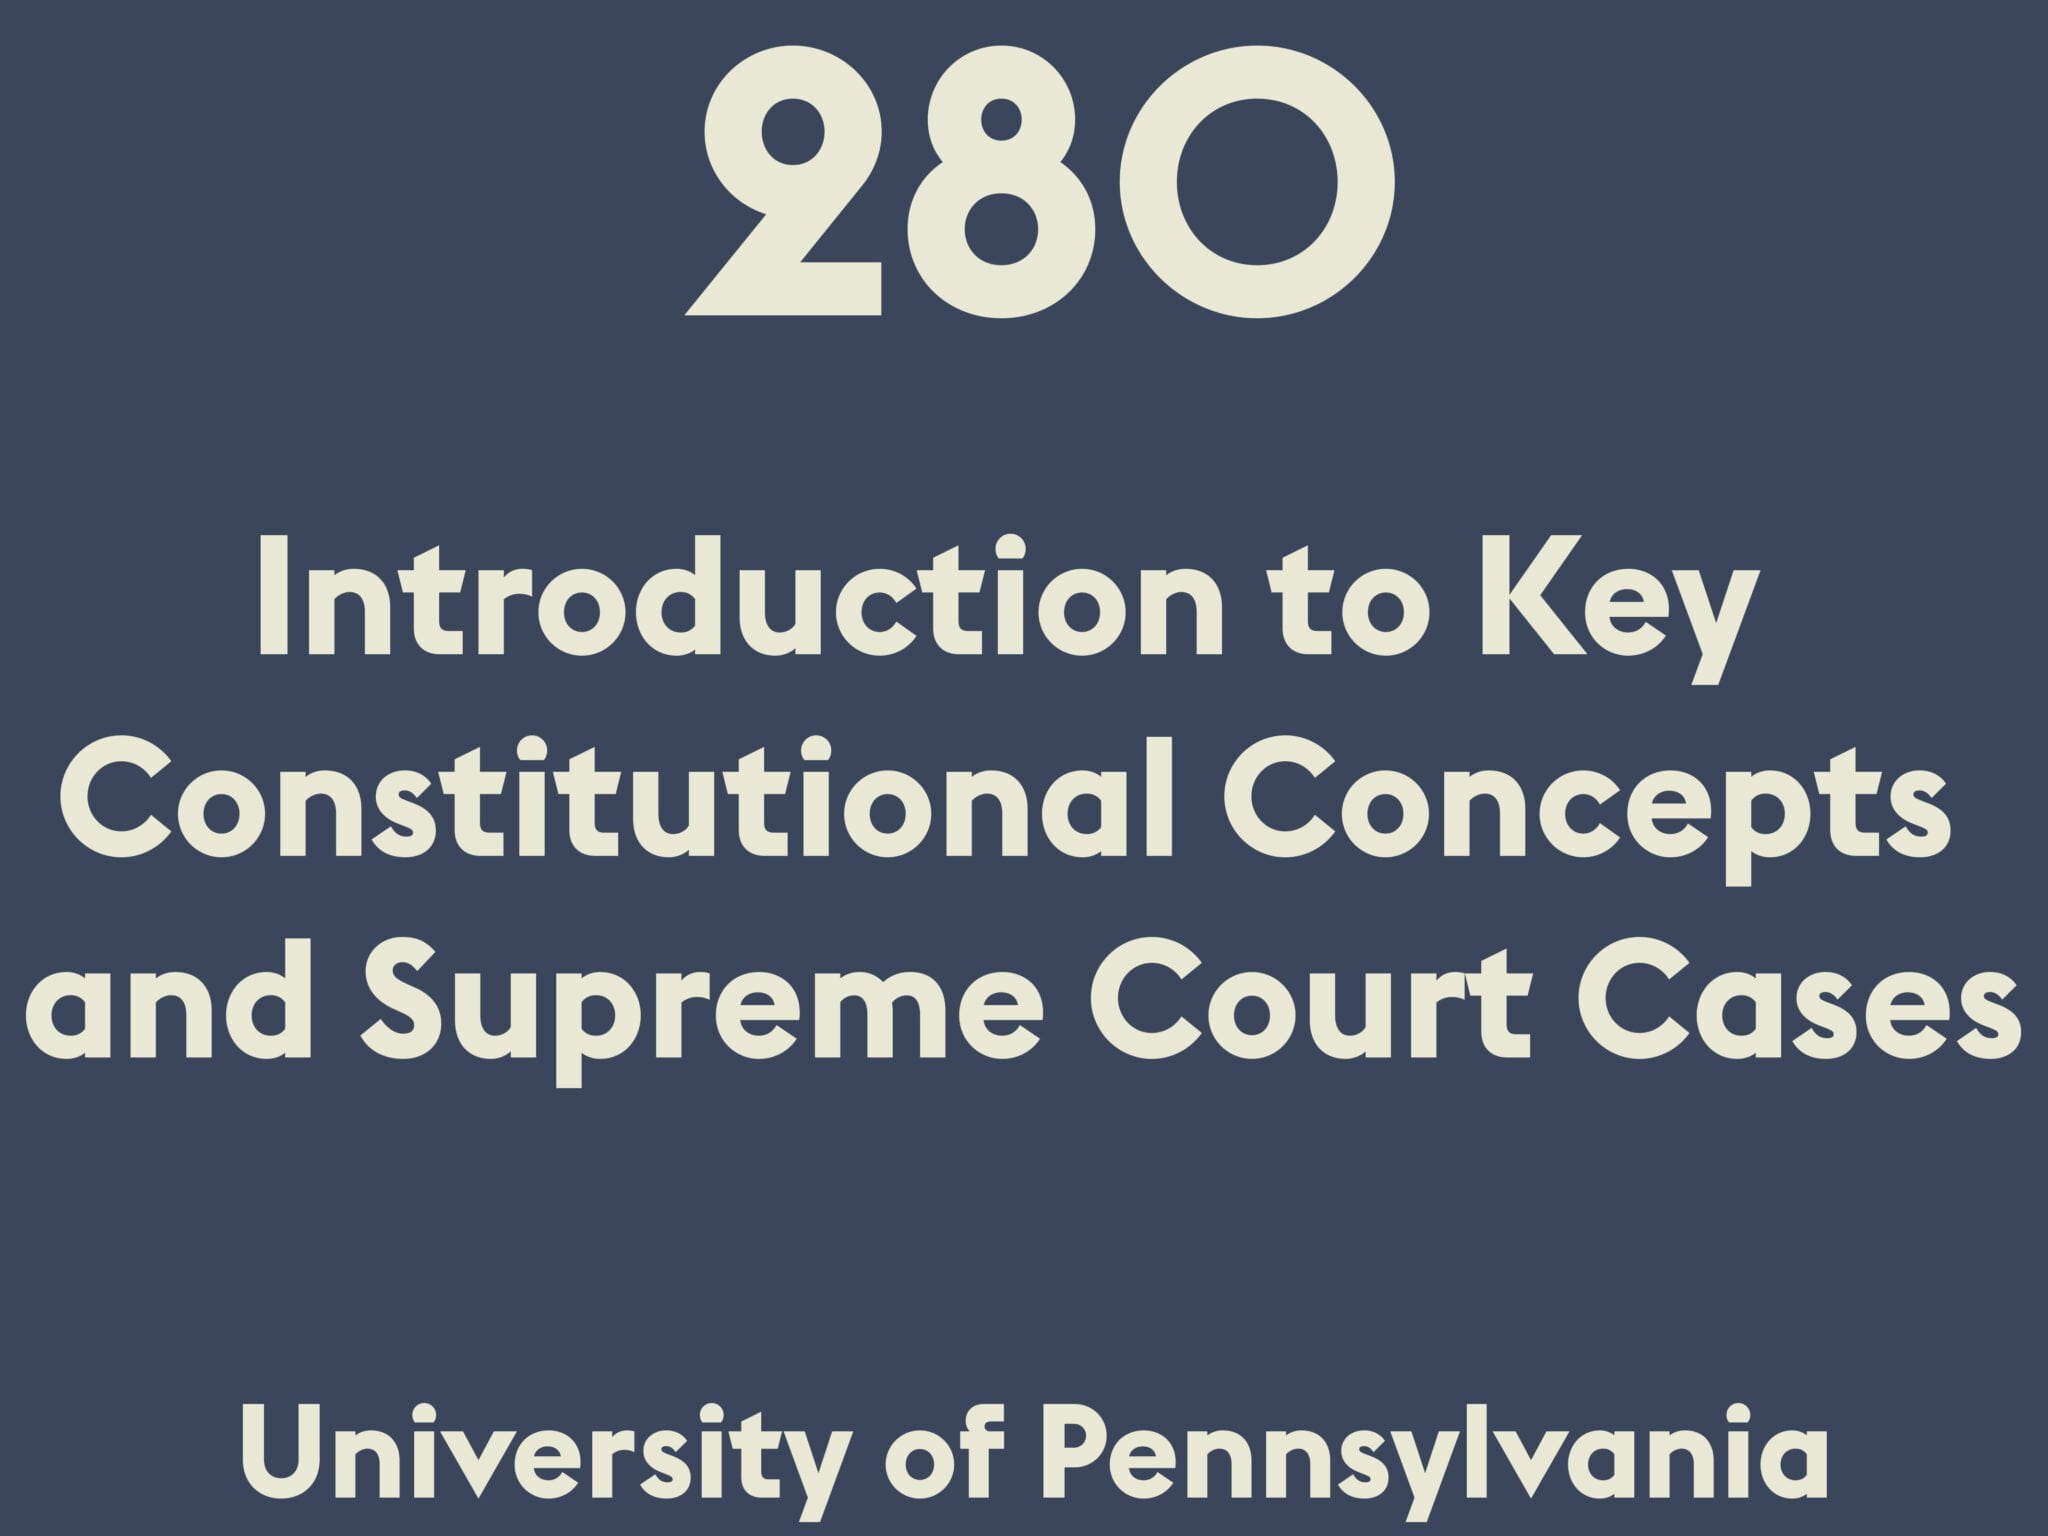 Introduction to Key Constitutional Concepts and Supreme Court Cases